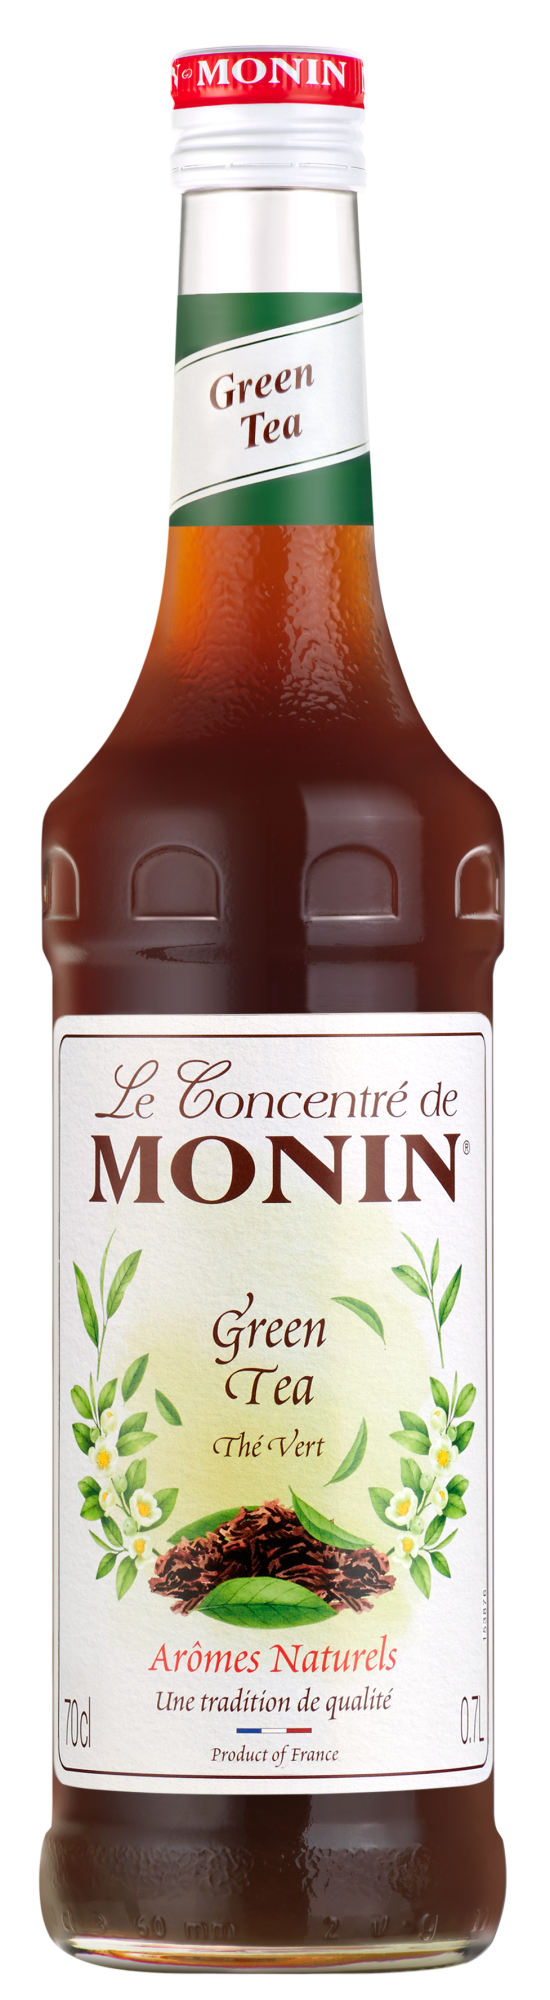 Buy MONIN Green Tea concentrate, light touch of sugar. It allows you to create an infinite array of homemade flavoured teas.